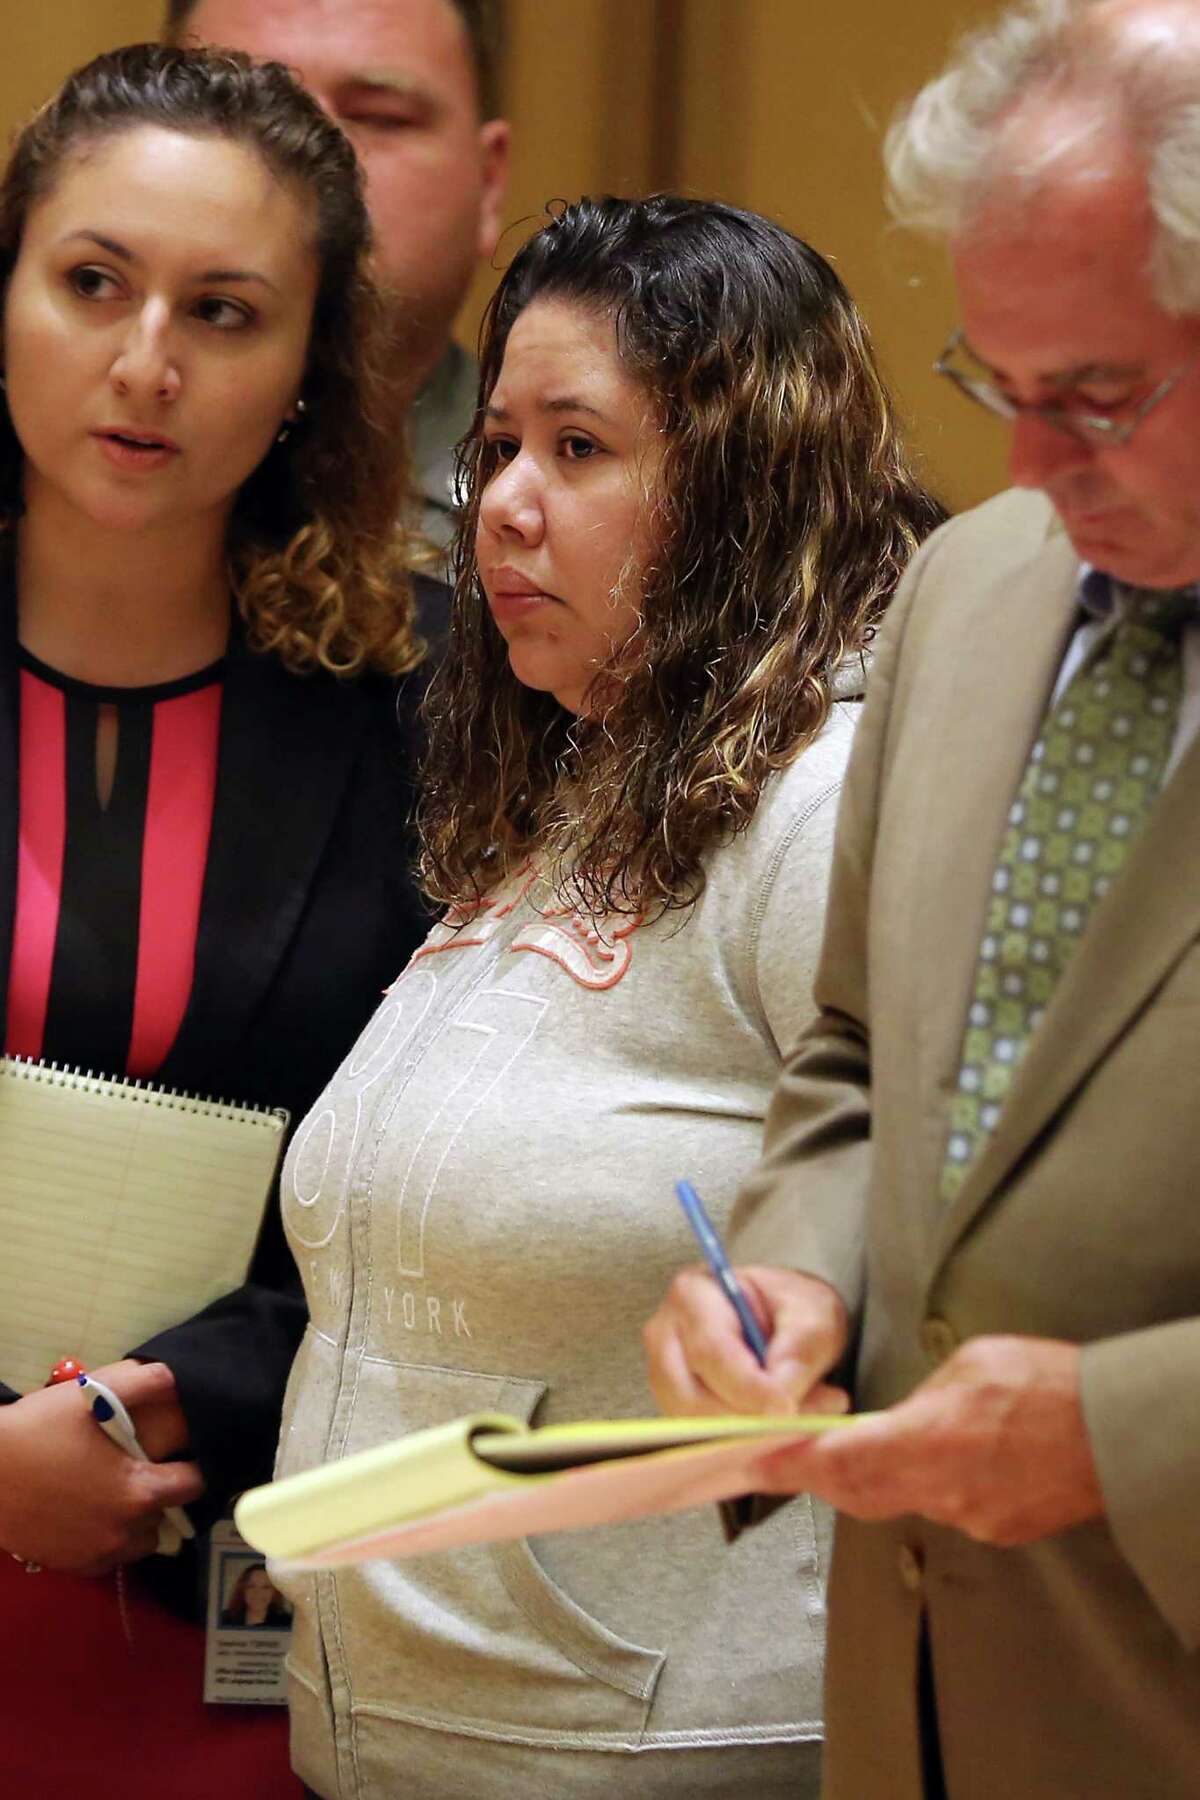 Nydia Carrillo-Maldonado stands in state Superior Court in Stamford as she is arraigned on first-degree manslaughter and risk of injury to a minor charges on Tuesday. Carrillo-Maldonado was the owner of Little Bears Beginnings Daycare, where a 2-month-old toddler died last month.